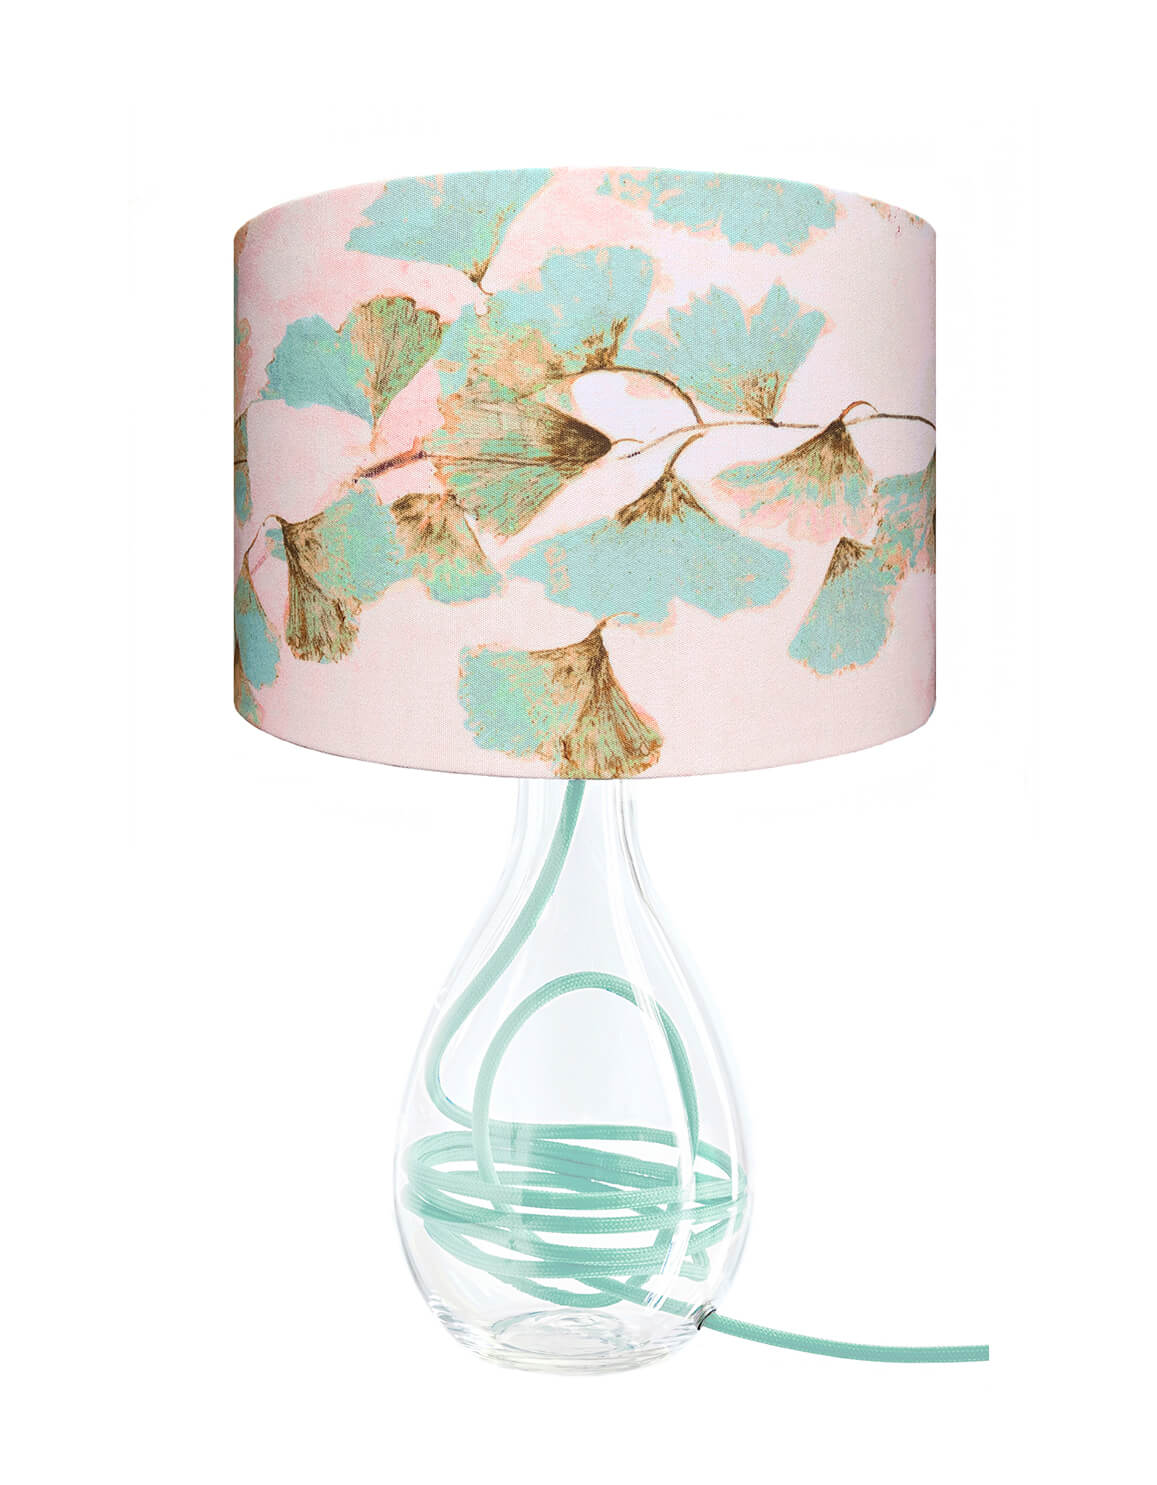 Ginkgo in Jade glass lamp on Jade flex, designed by Anna Jacobs